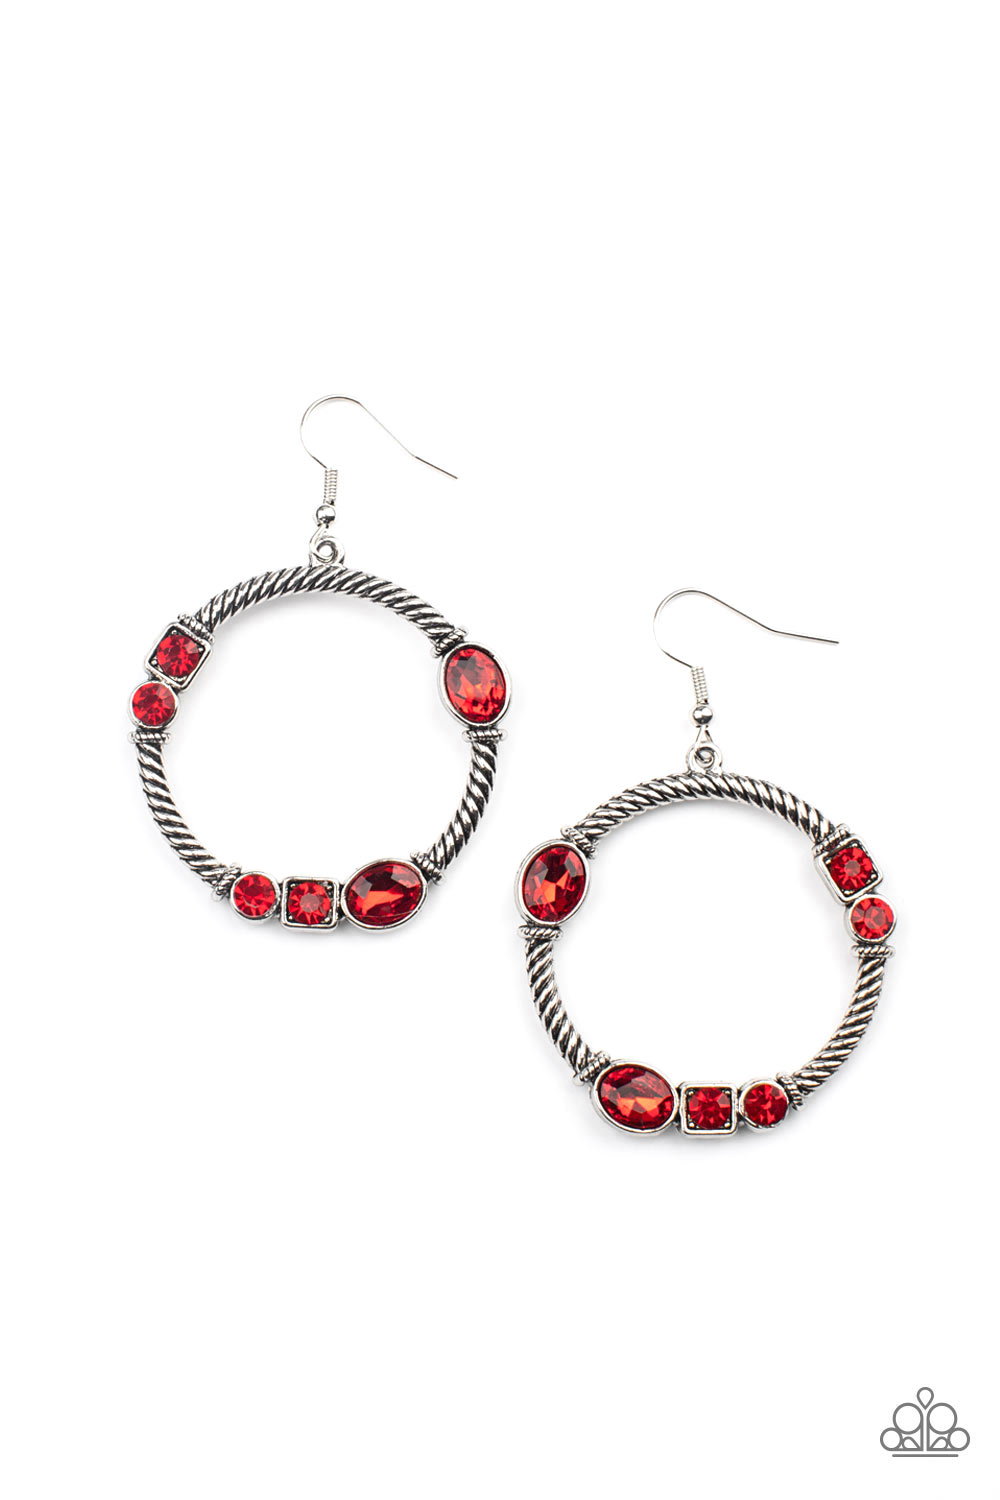 D101 - Glamorous Garland, Paparazzi Red Earring by Paparazzi Accessories on Fancy5Fashion.com